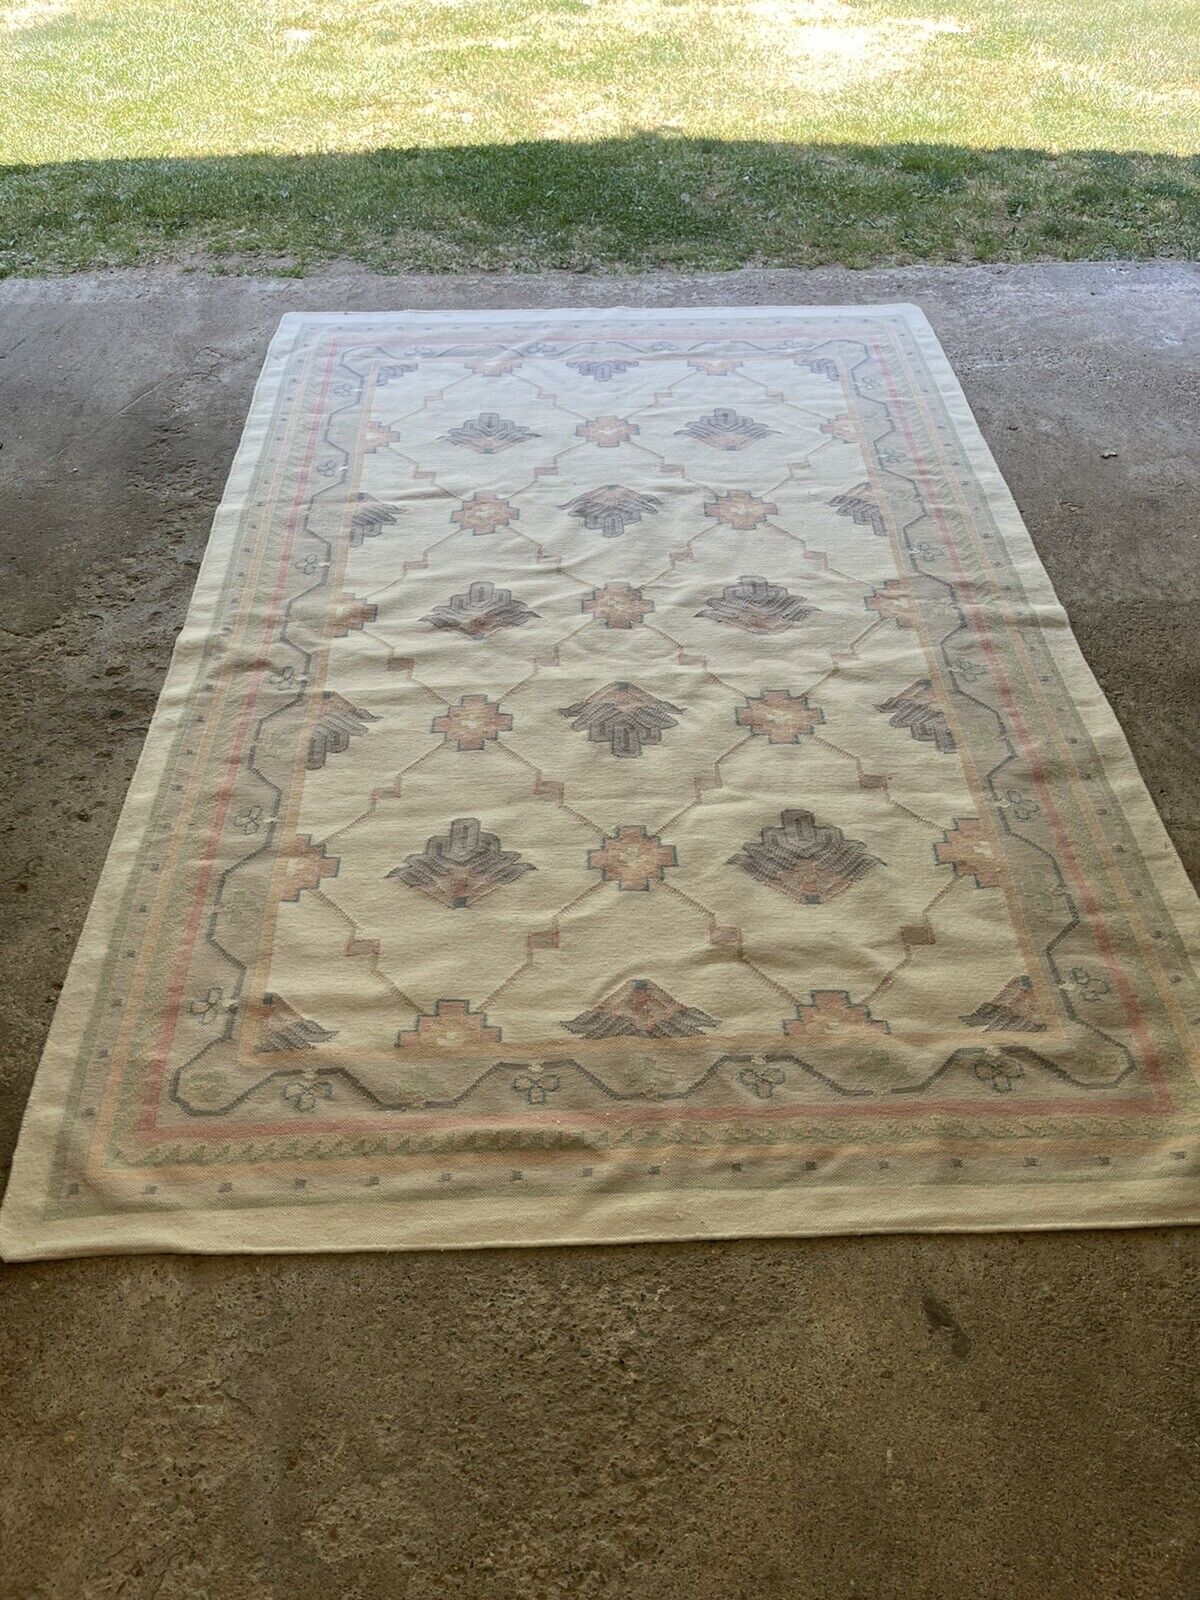 Vintage Southwest - Hand Woven - Summer -Winter Rug - Muted Color 67”x100”Carpet